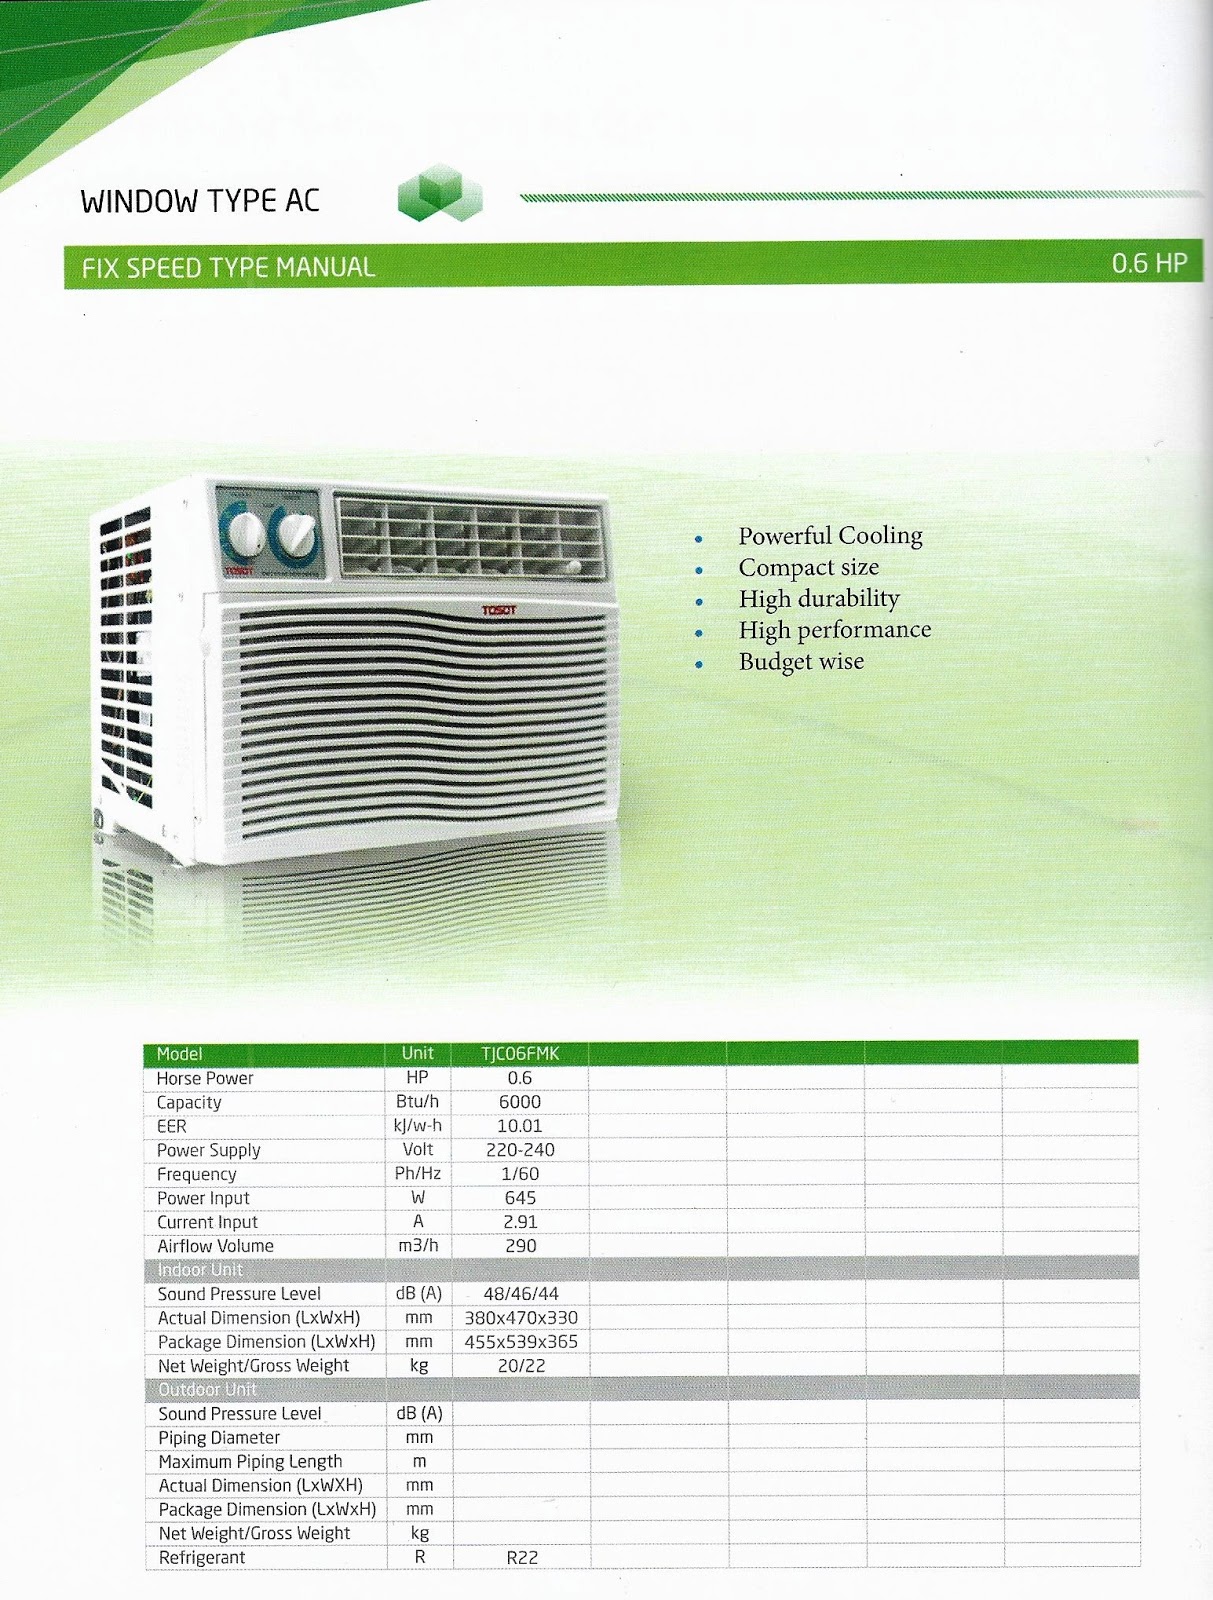 MaximaxSystems.com: TOSOT WINDOW FIX SPEED TYPE MANUAL 0.6HP AIR CON